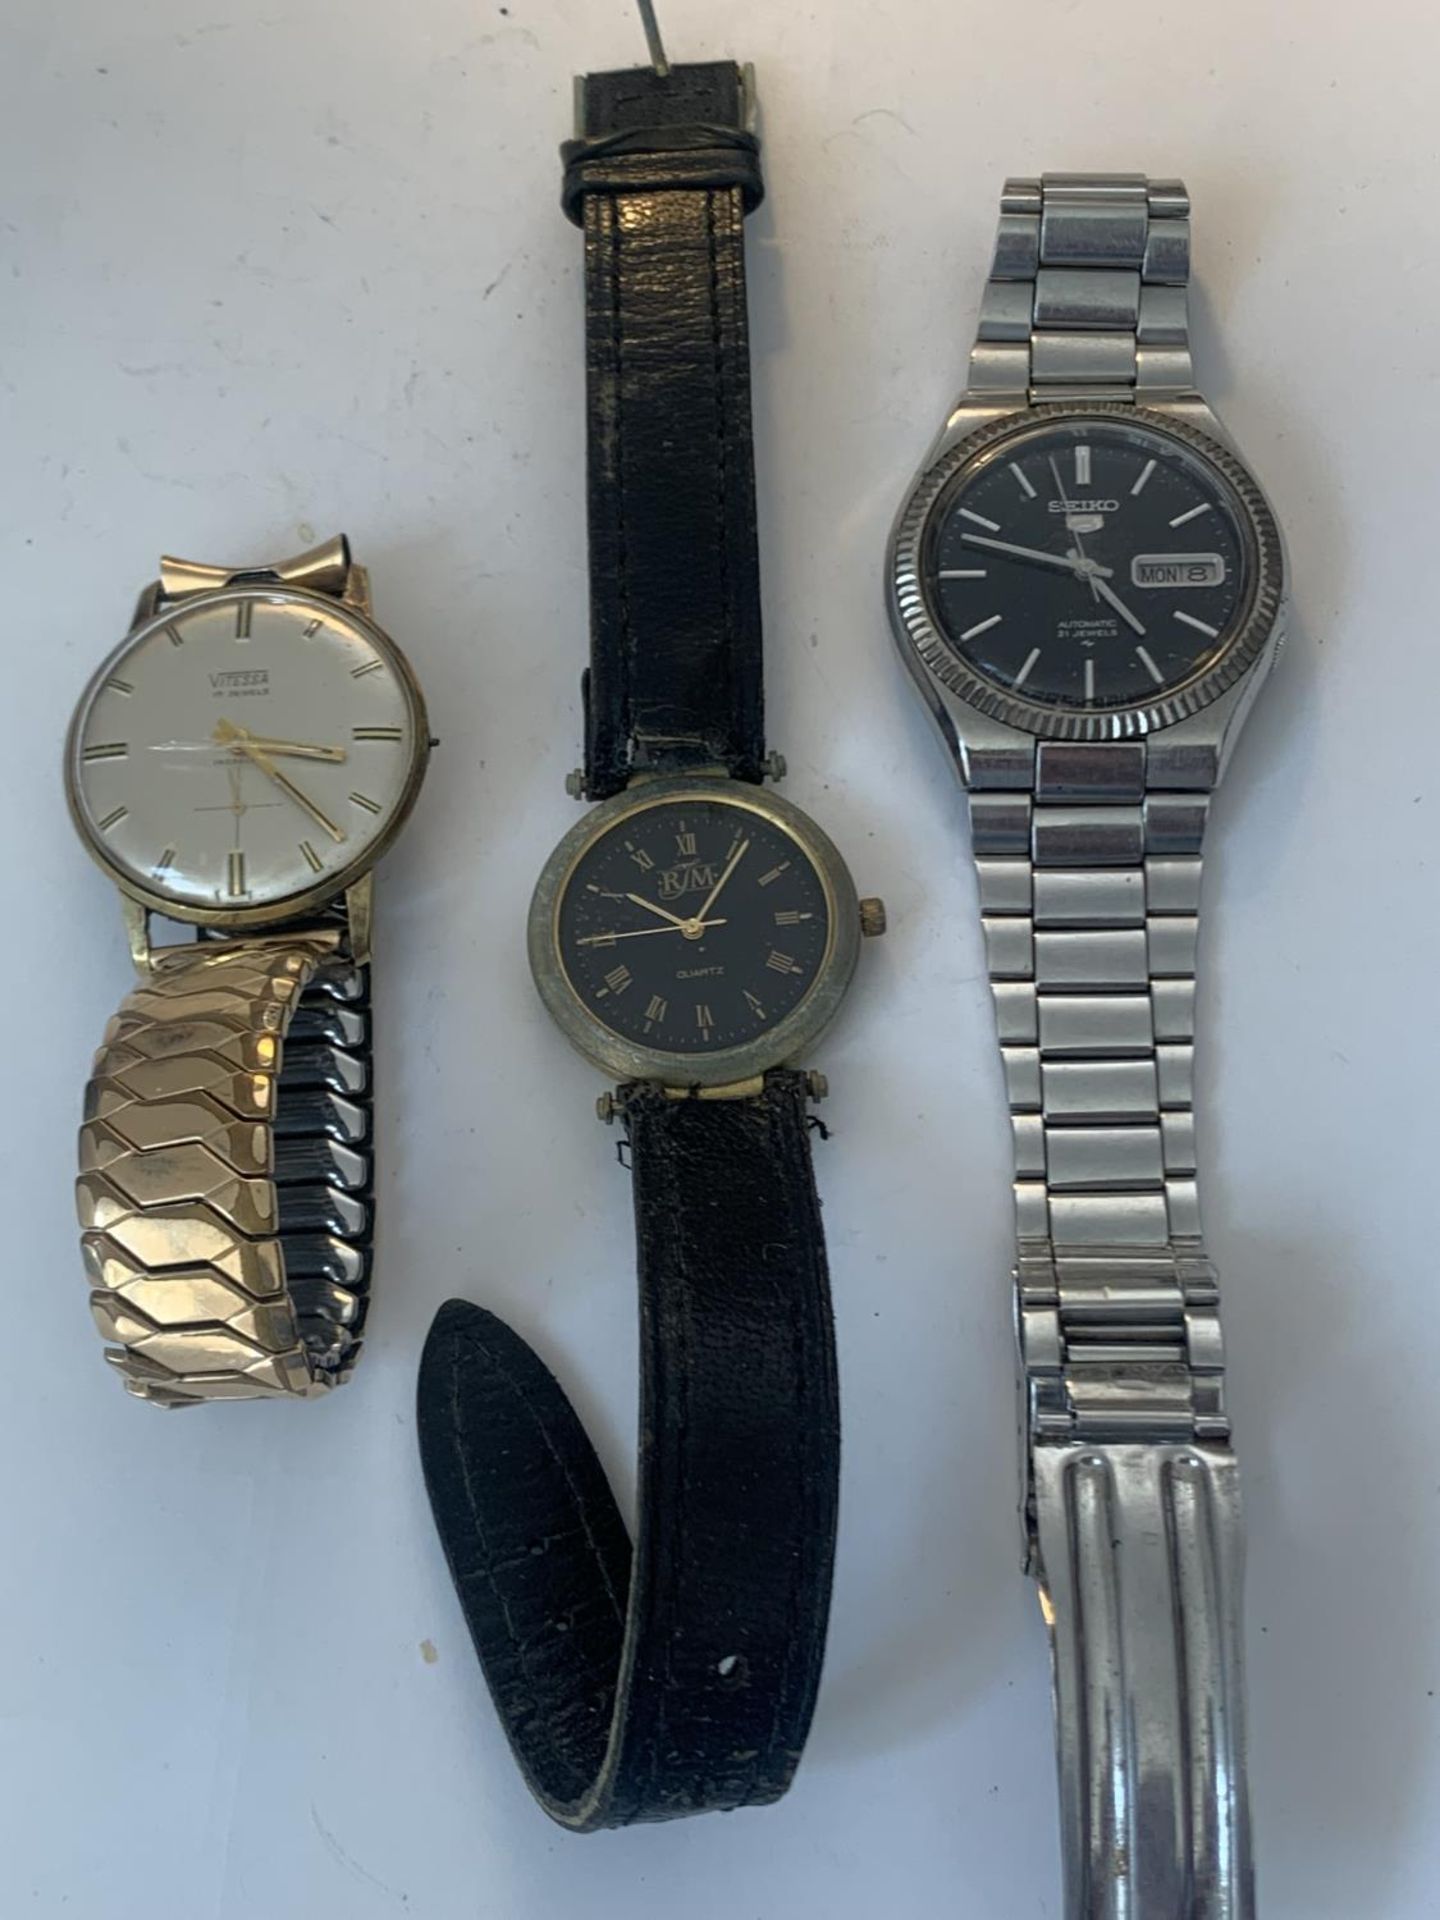 THREE VINTAGE WRIST WATCHES TO INCLUDE A VITESSA 17 JEWELS (NO CROWN WINDER), AN RJM AND A SEIKO